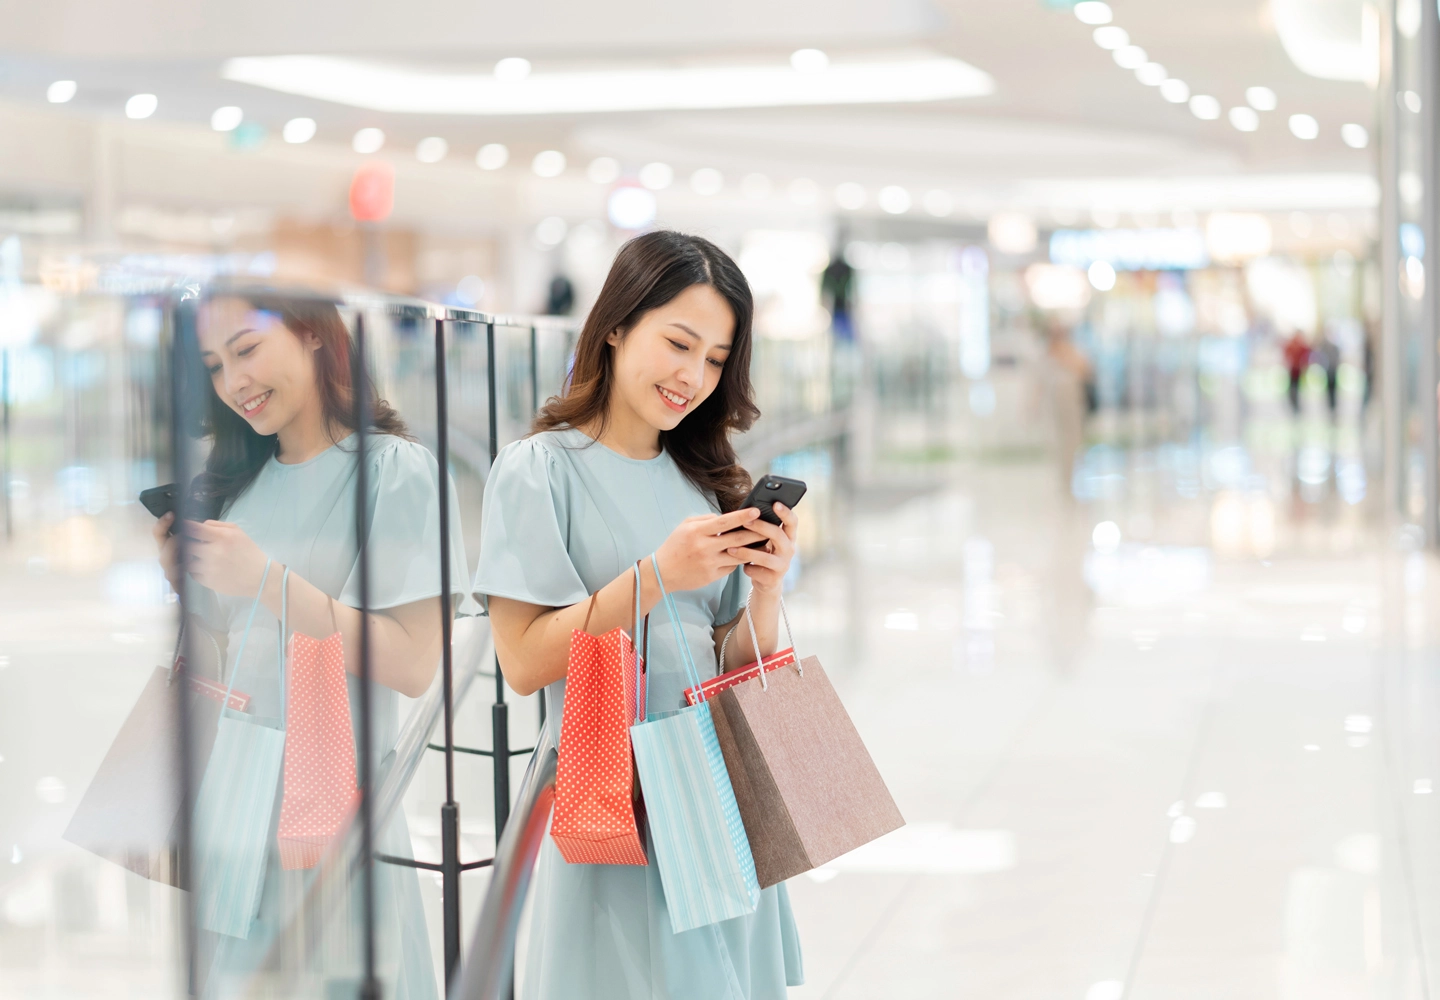 Vietnamese consumers are open to experience new brands